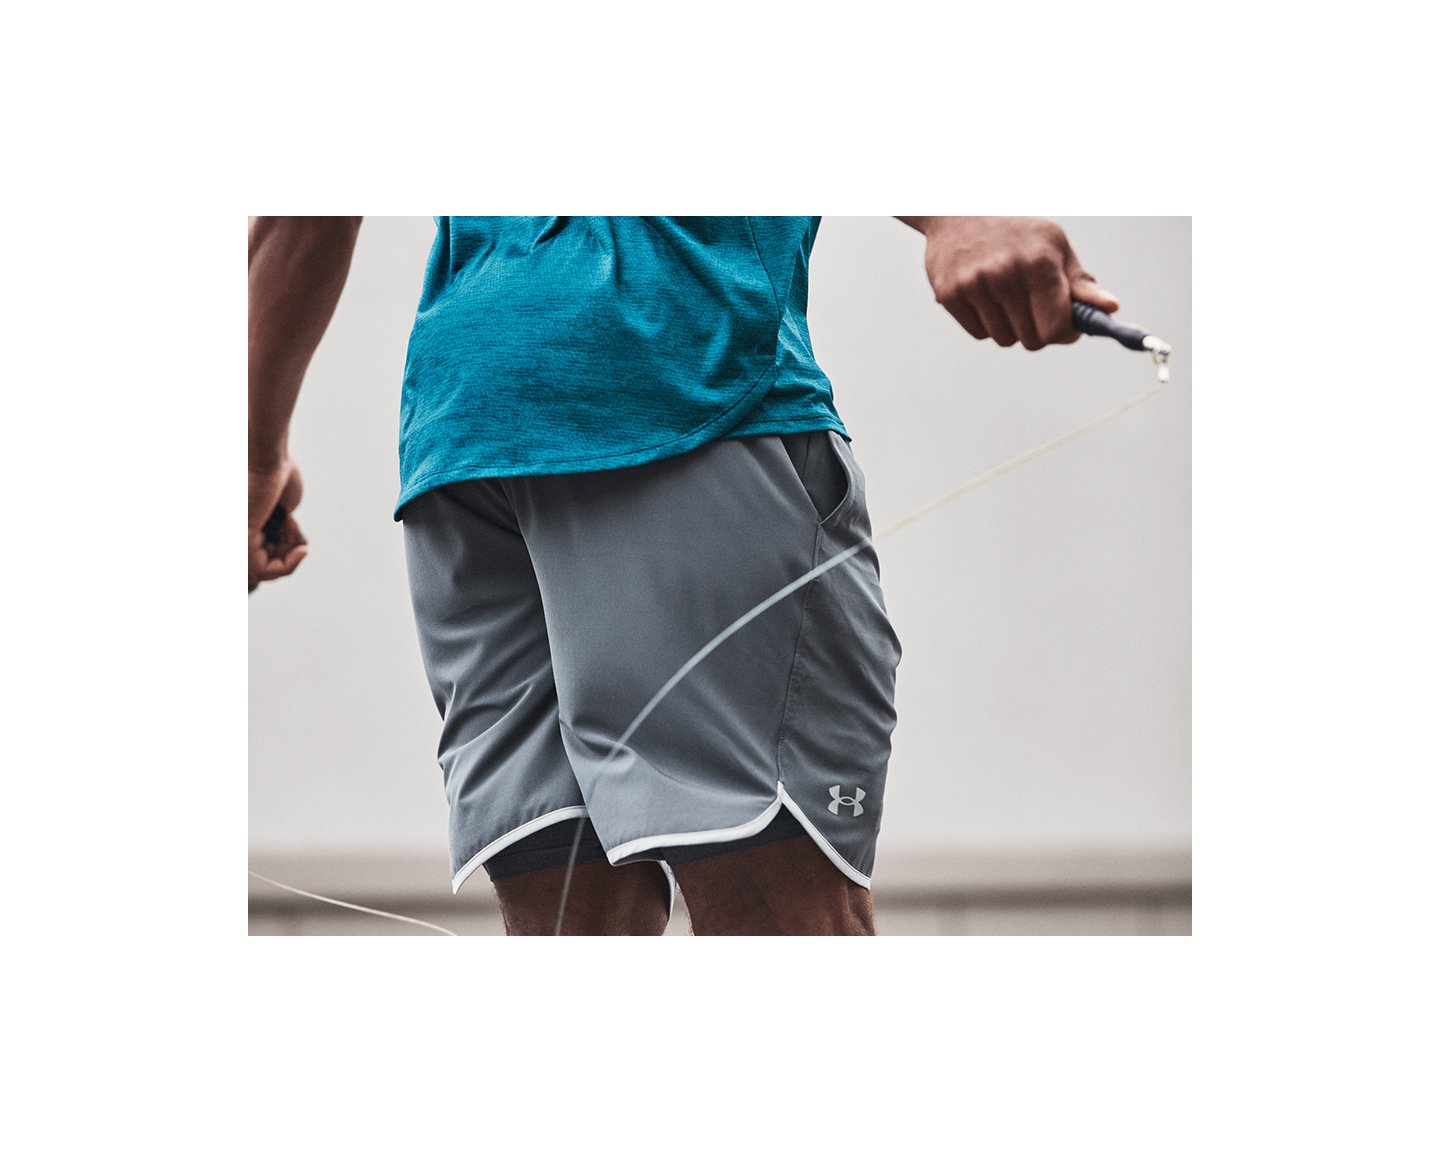 Men's UA Elevated Woven 2.0 Shorts  Running shorts, Under armour, Mens  outfits